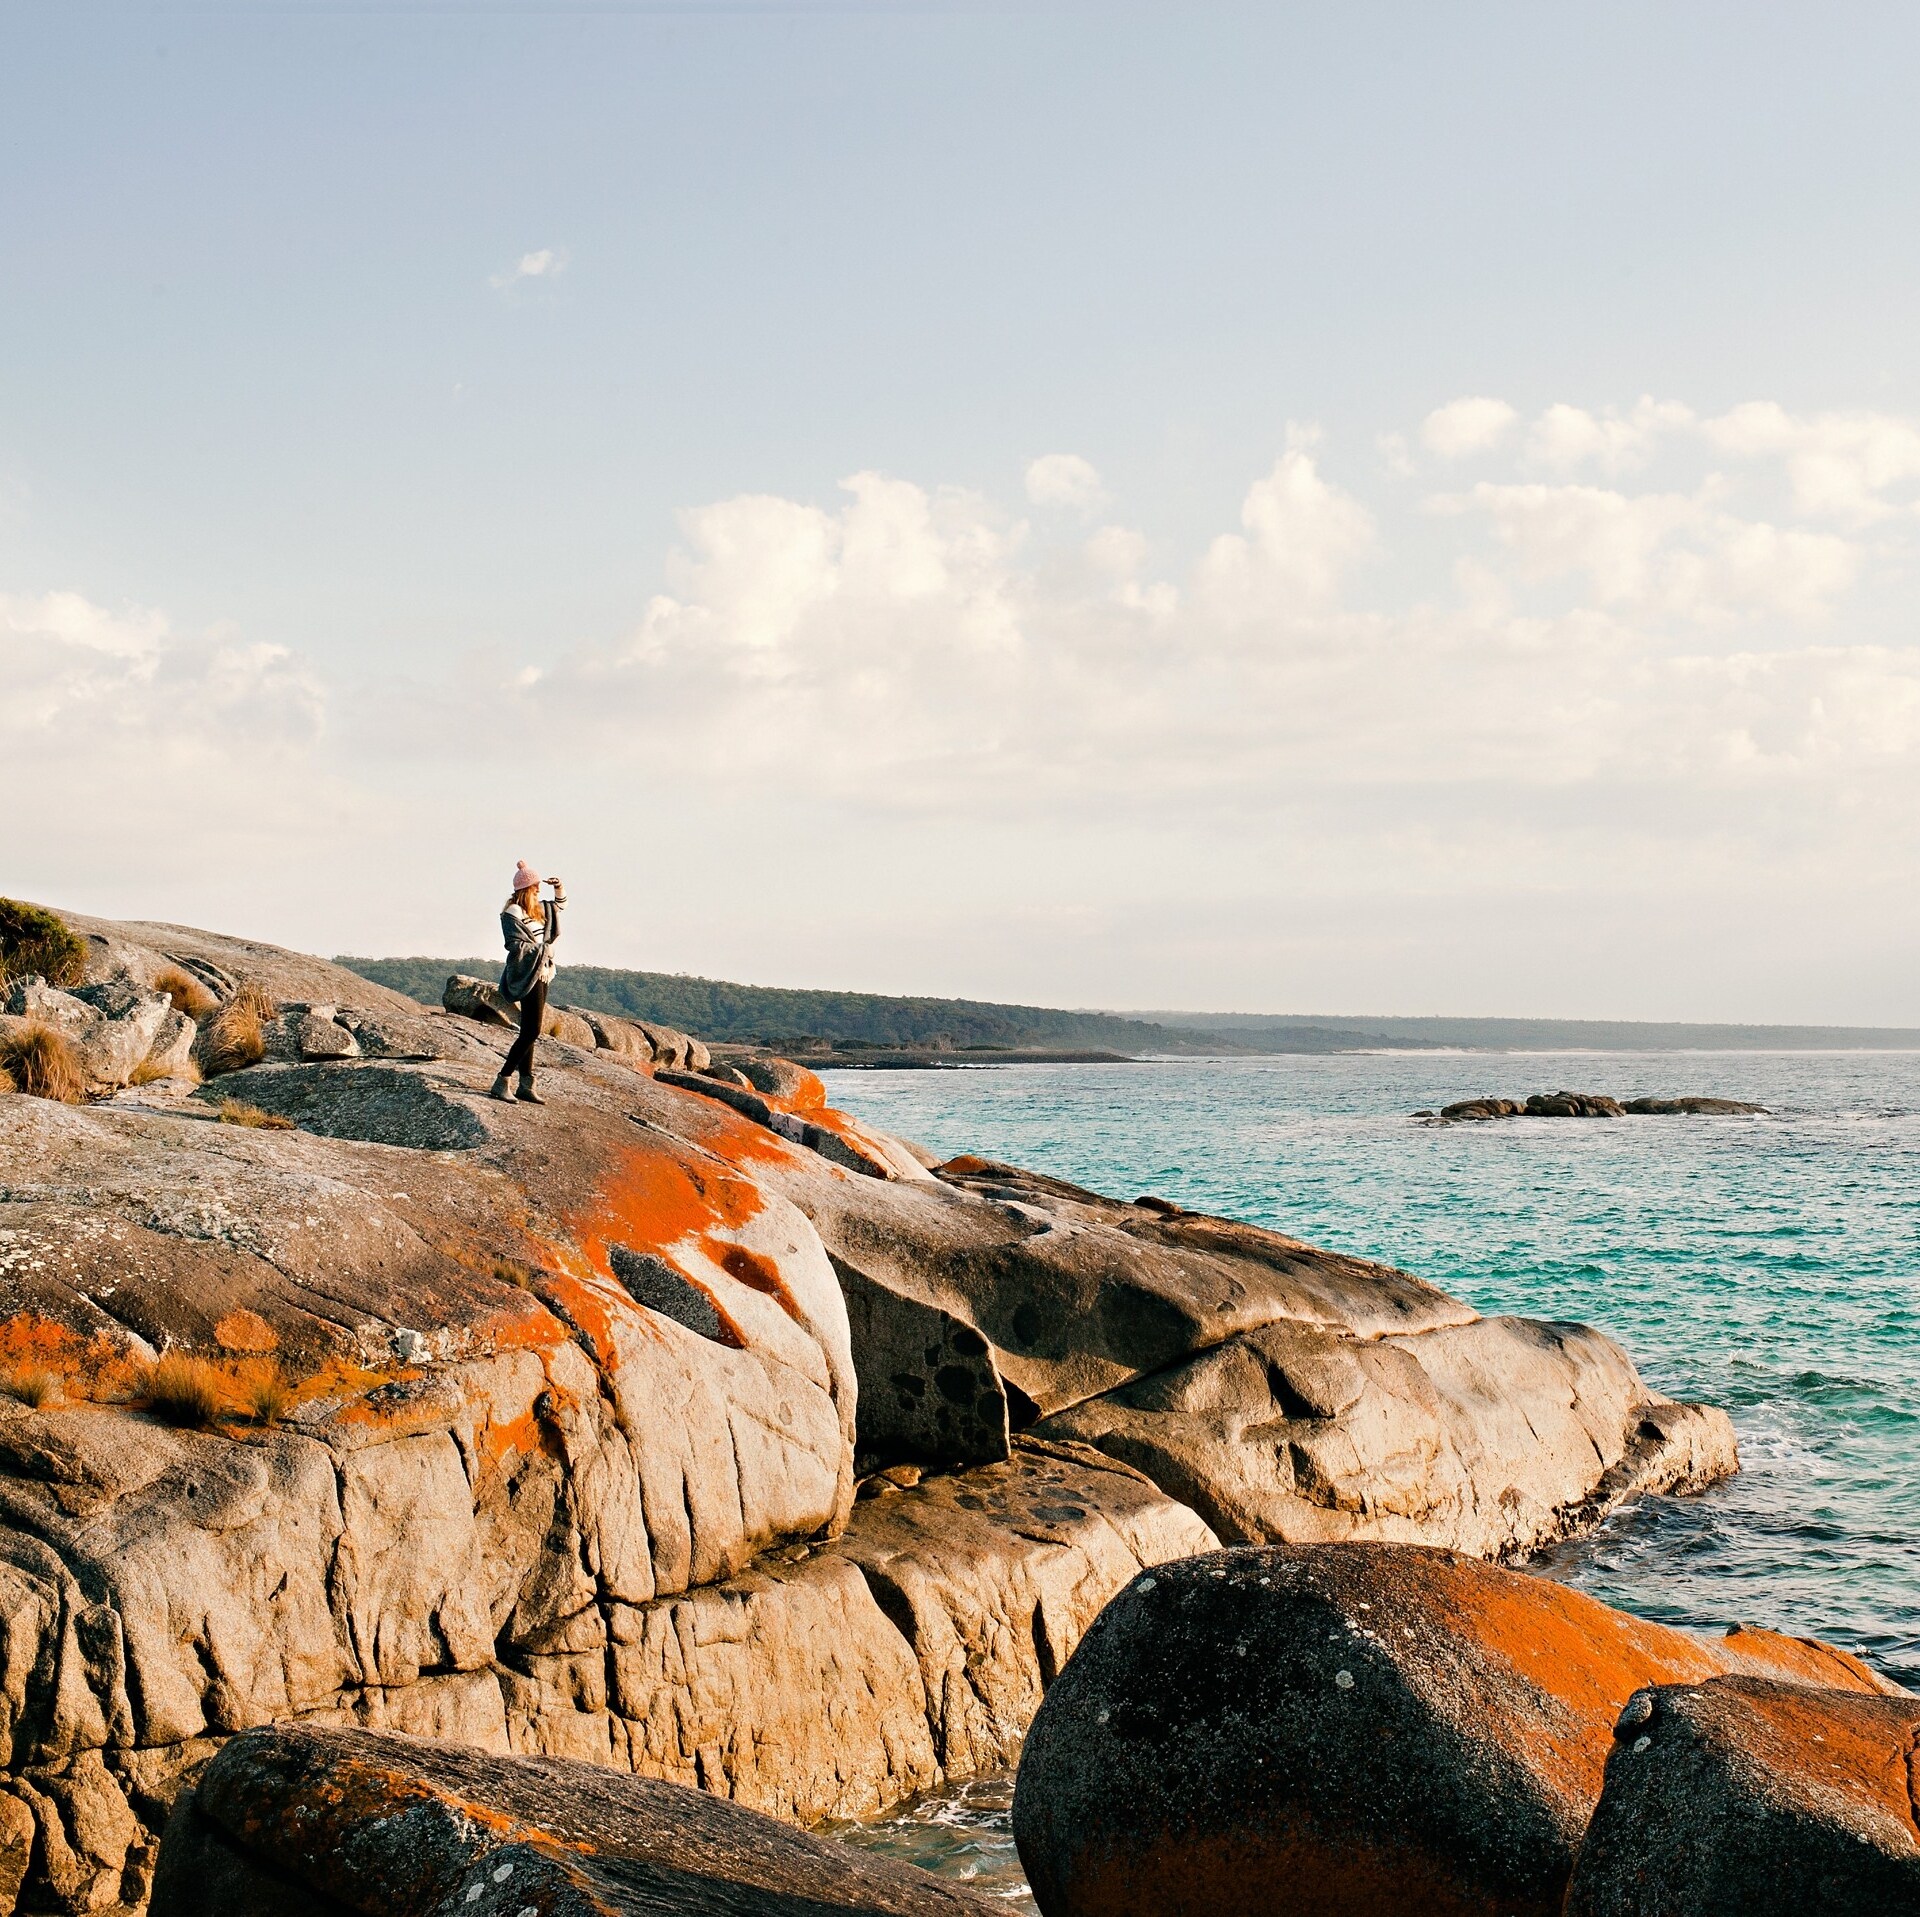 Woman stand on rocks looking out at the ocean at The Gardens in the Bay of Fires Conservation Area © Lisa Kuilenburg